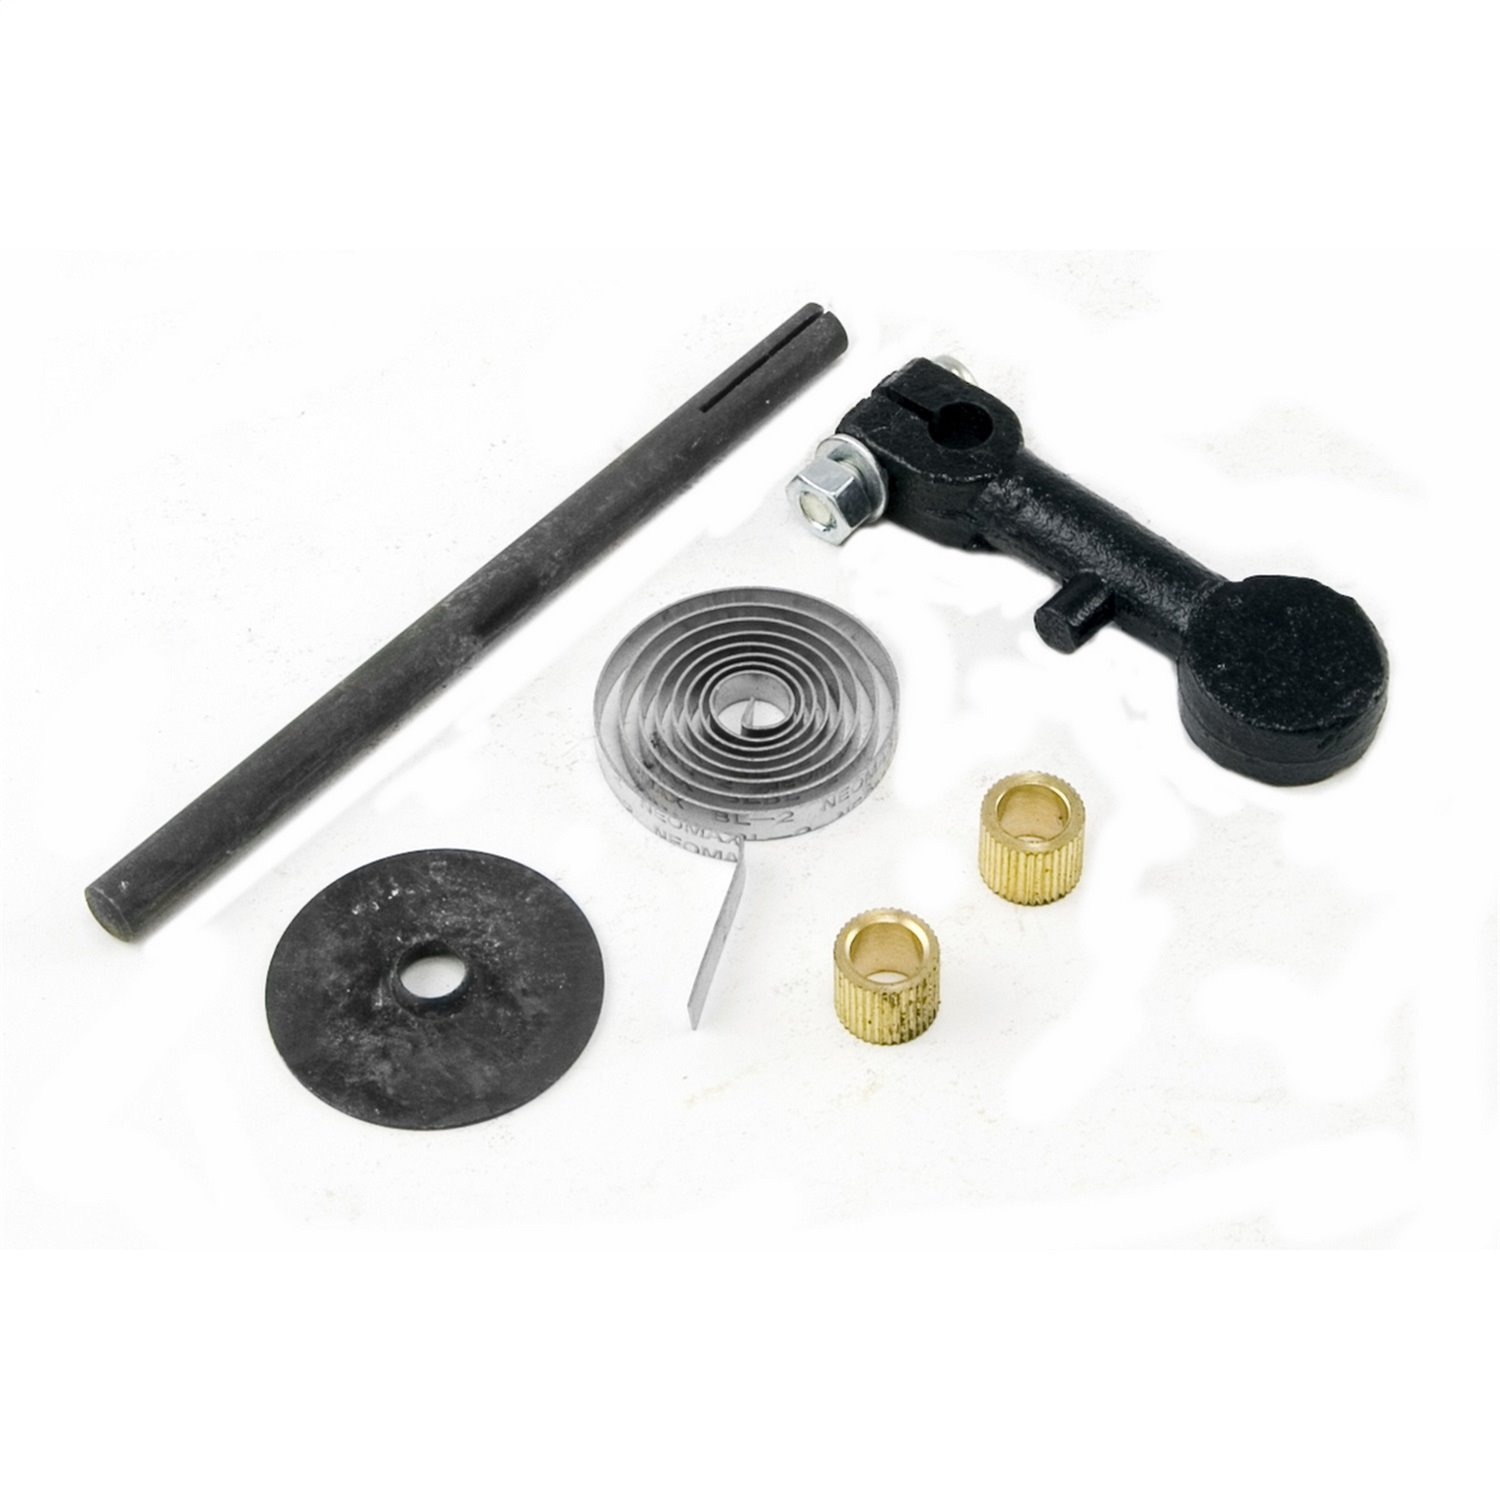 This exhaust manifold hardware kit from Omix-ADA fits 41-53 Ford and Willys models with the 134 cubic inch L-head engine.